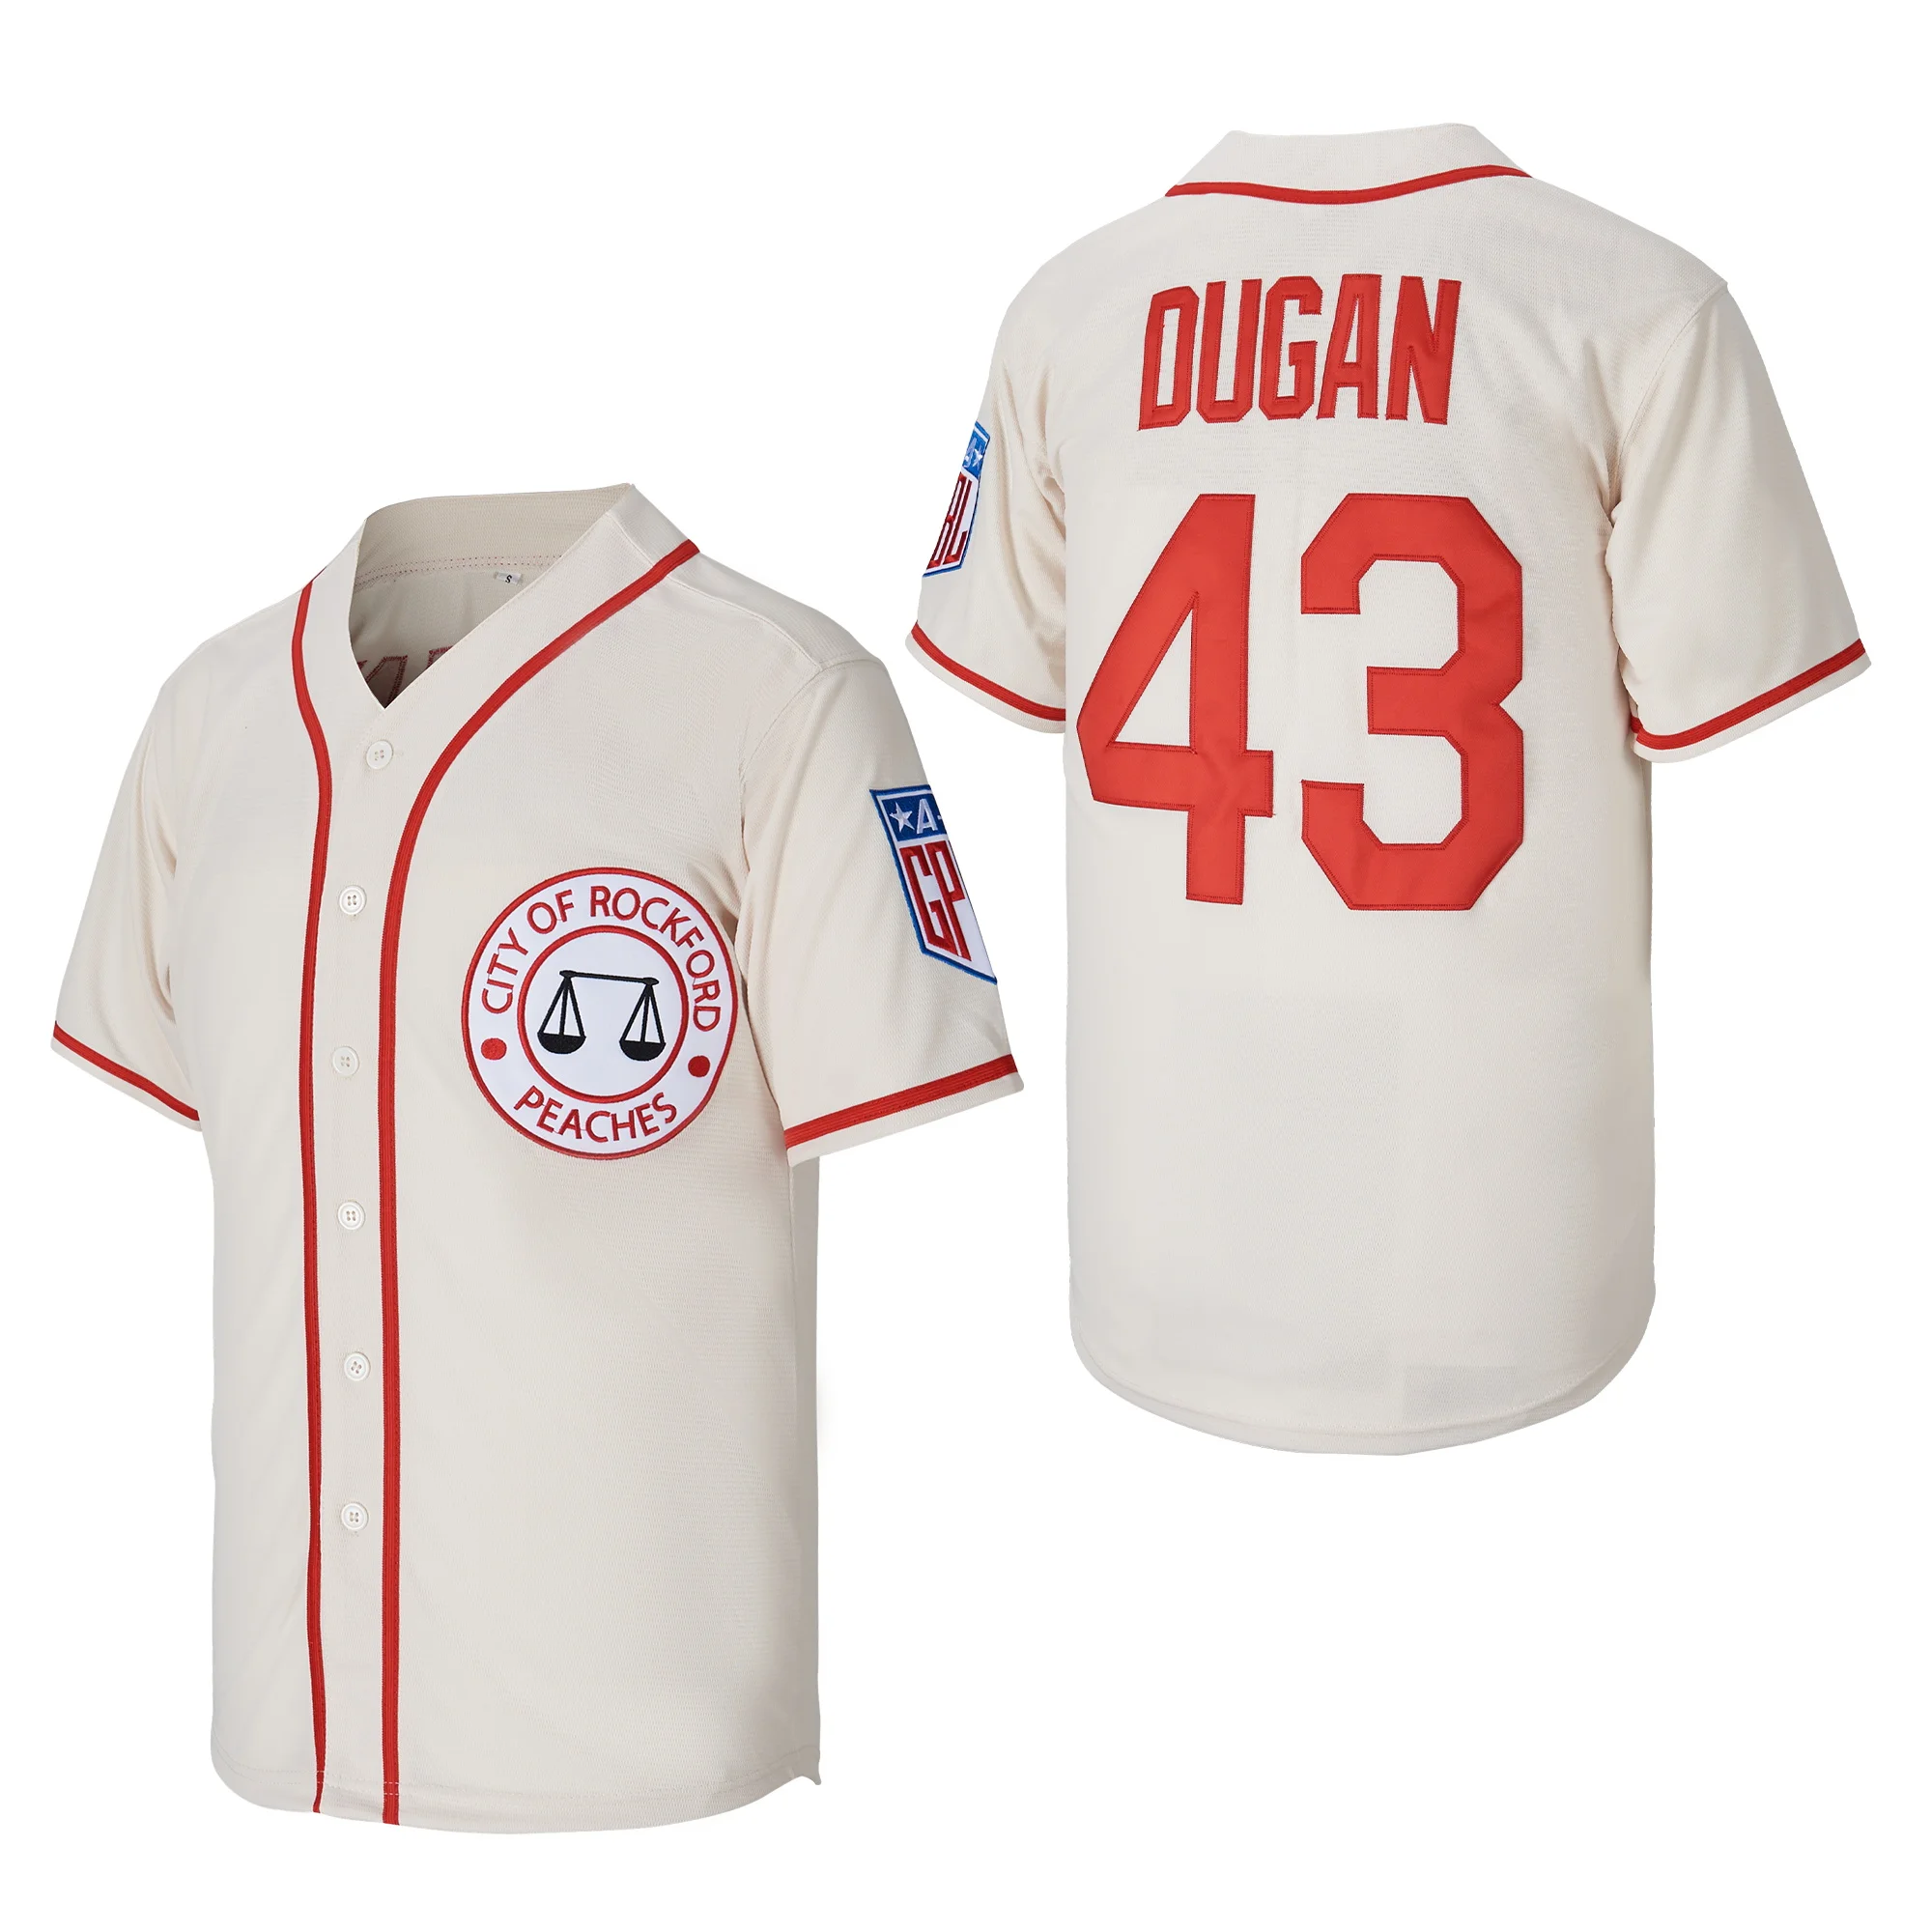 

#43 Jimmy Dugan City of Rockford Peaches A League of Their Own Movie Men's Baseball Jersey